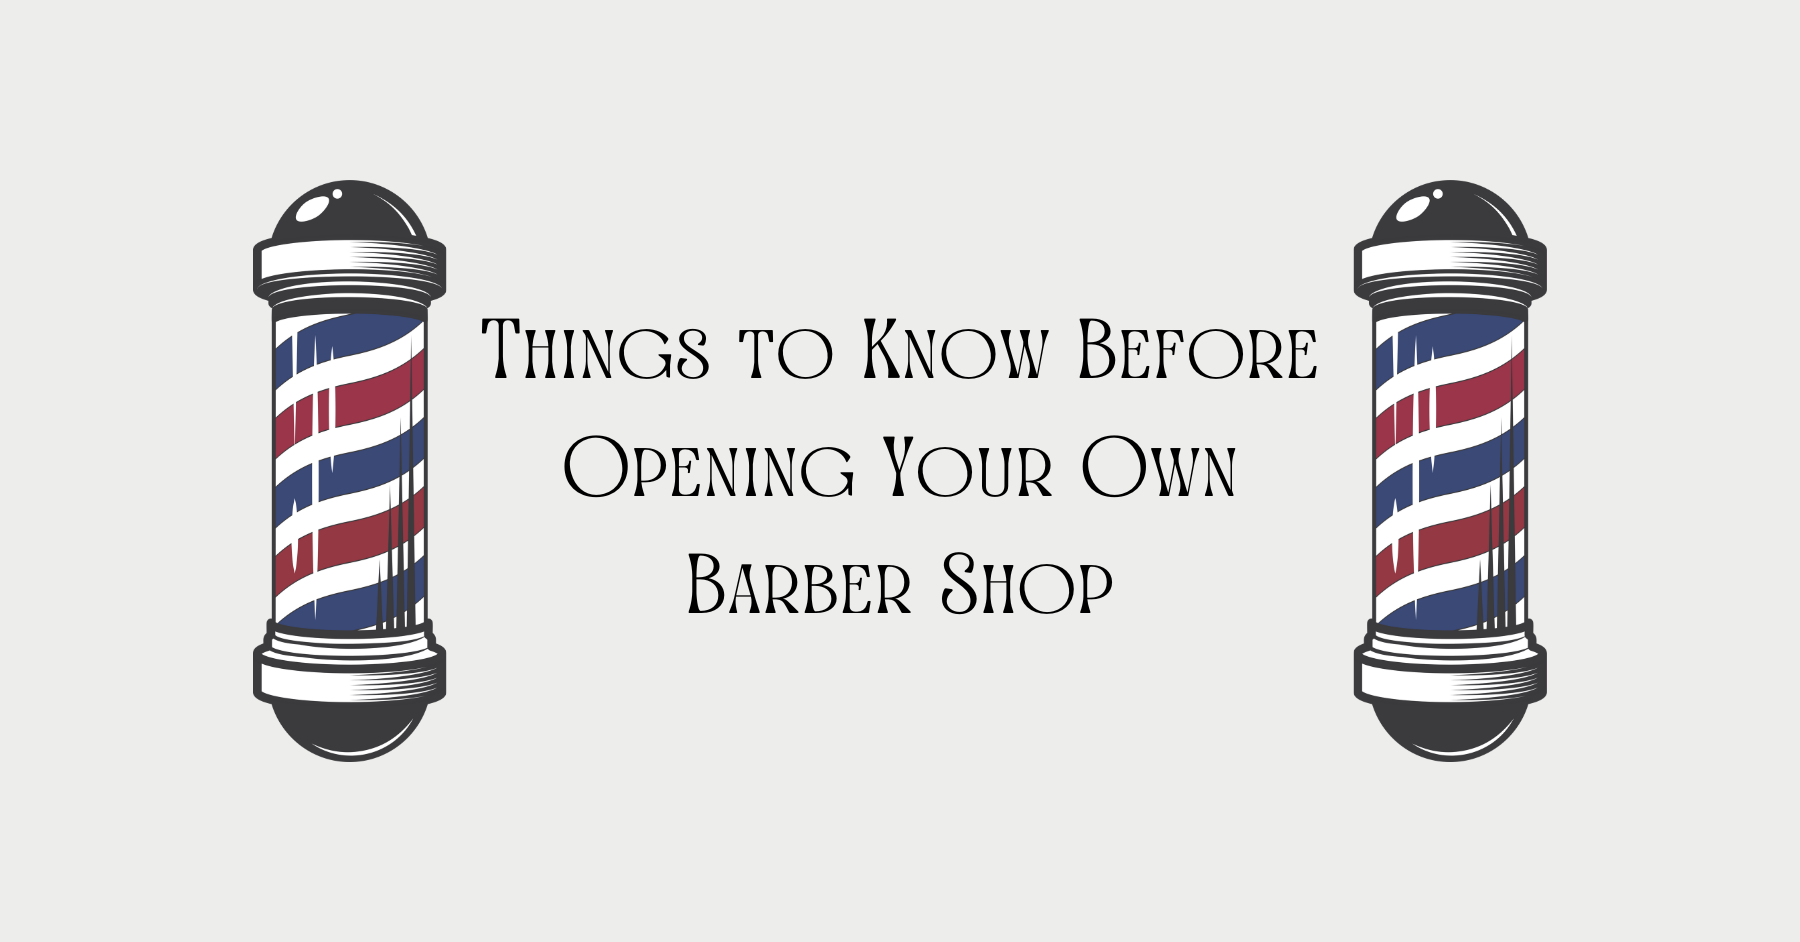 Things to Know Before Opening Your Own Barber Shop